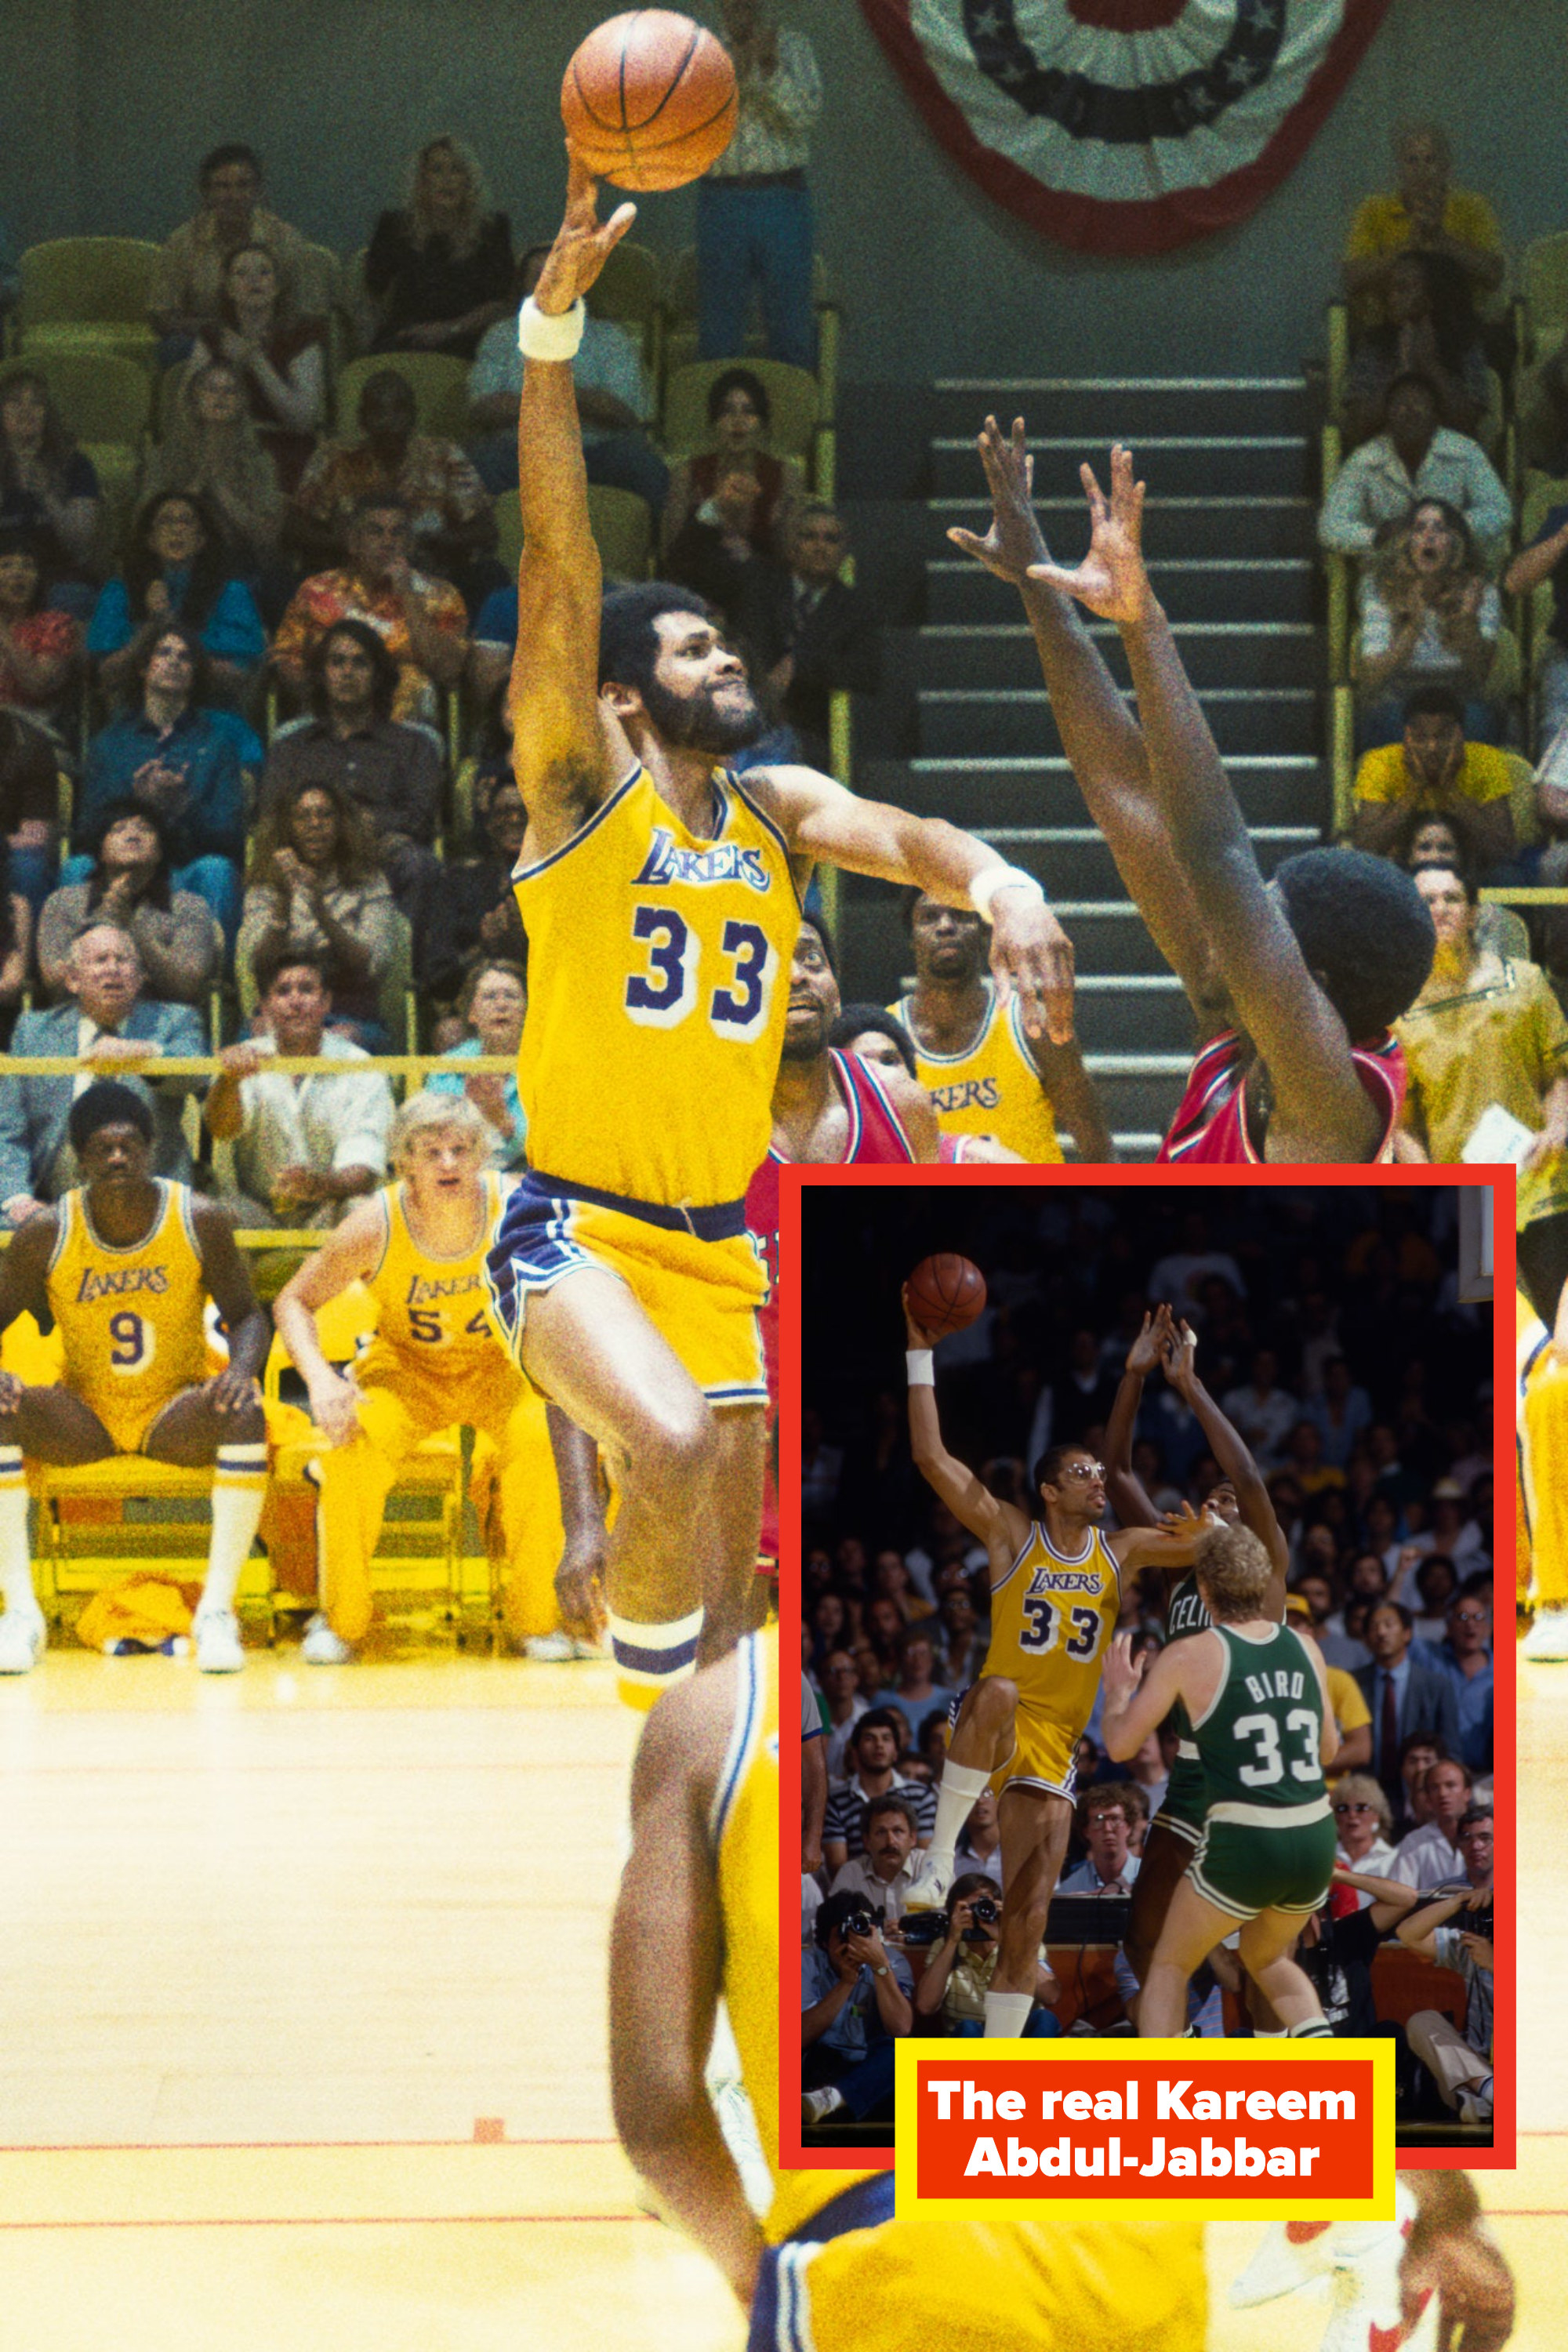 Solomon Hughes as Kareem Abdul-Jabbar shoots a basket during a game in &quot;Winning Time&quot;